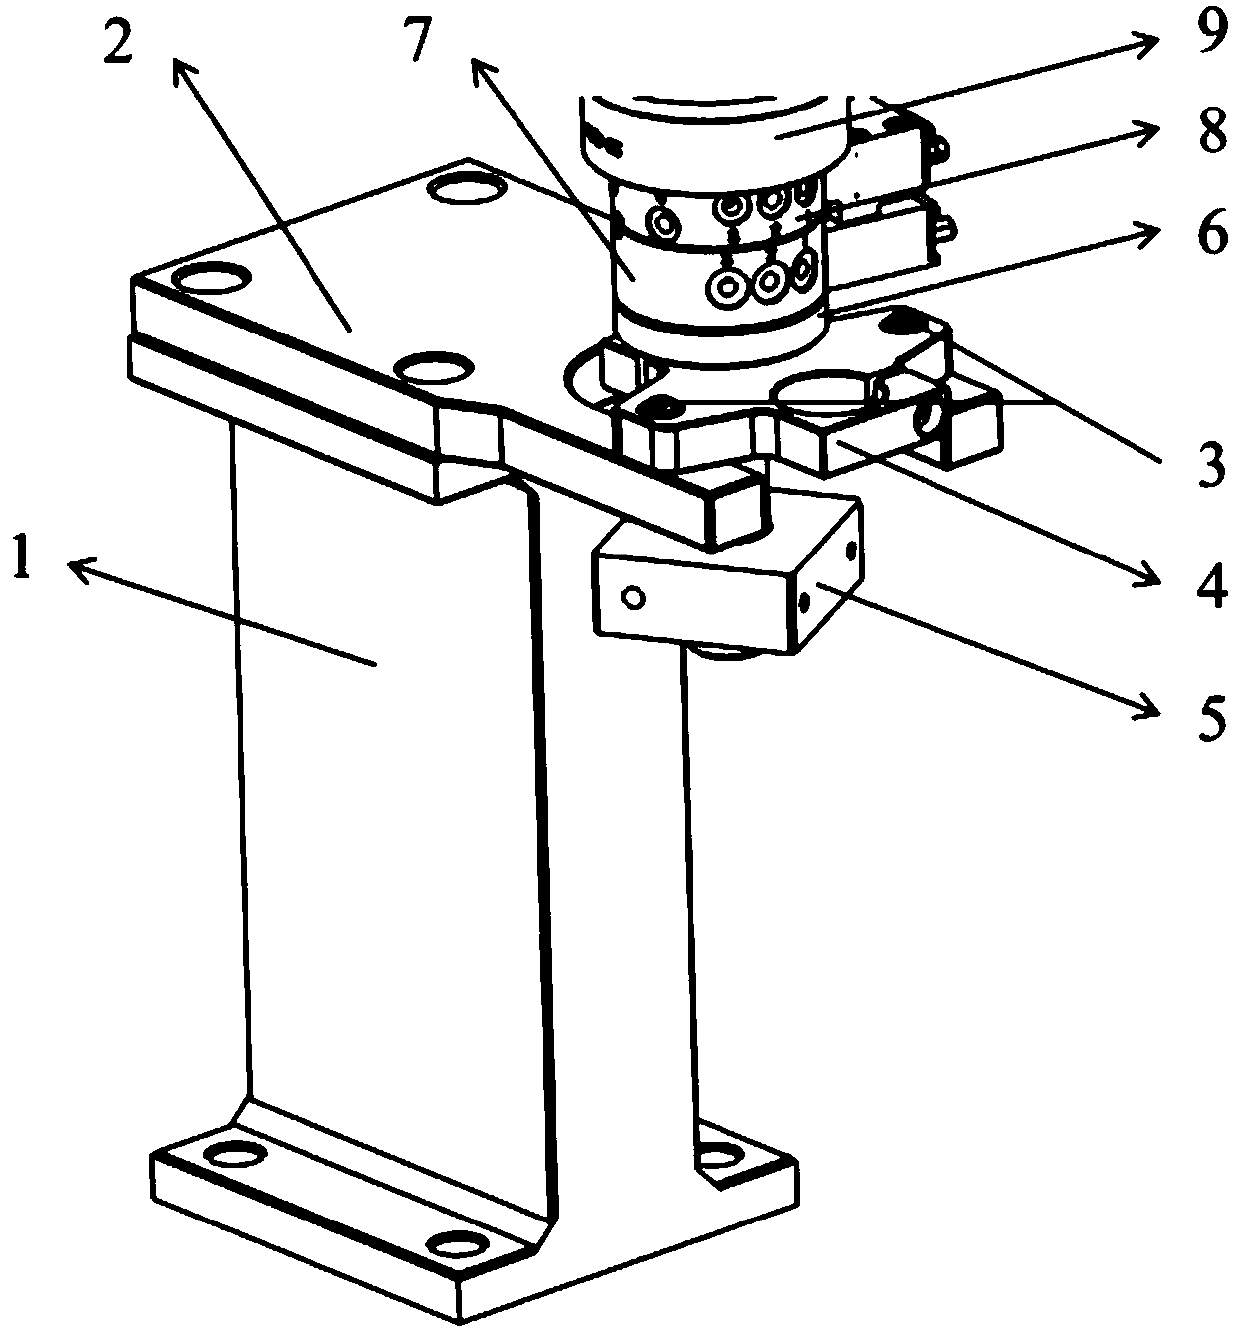 Welding head assembling and disassembling device